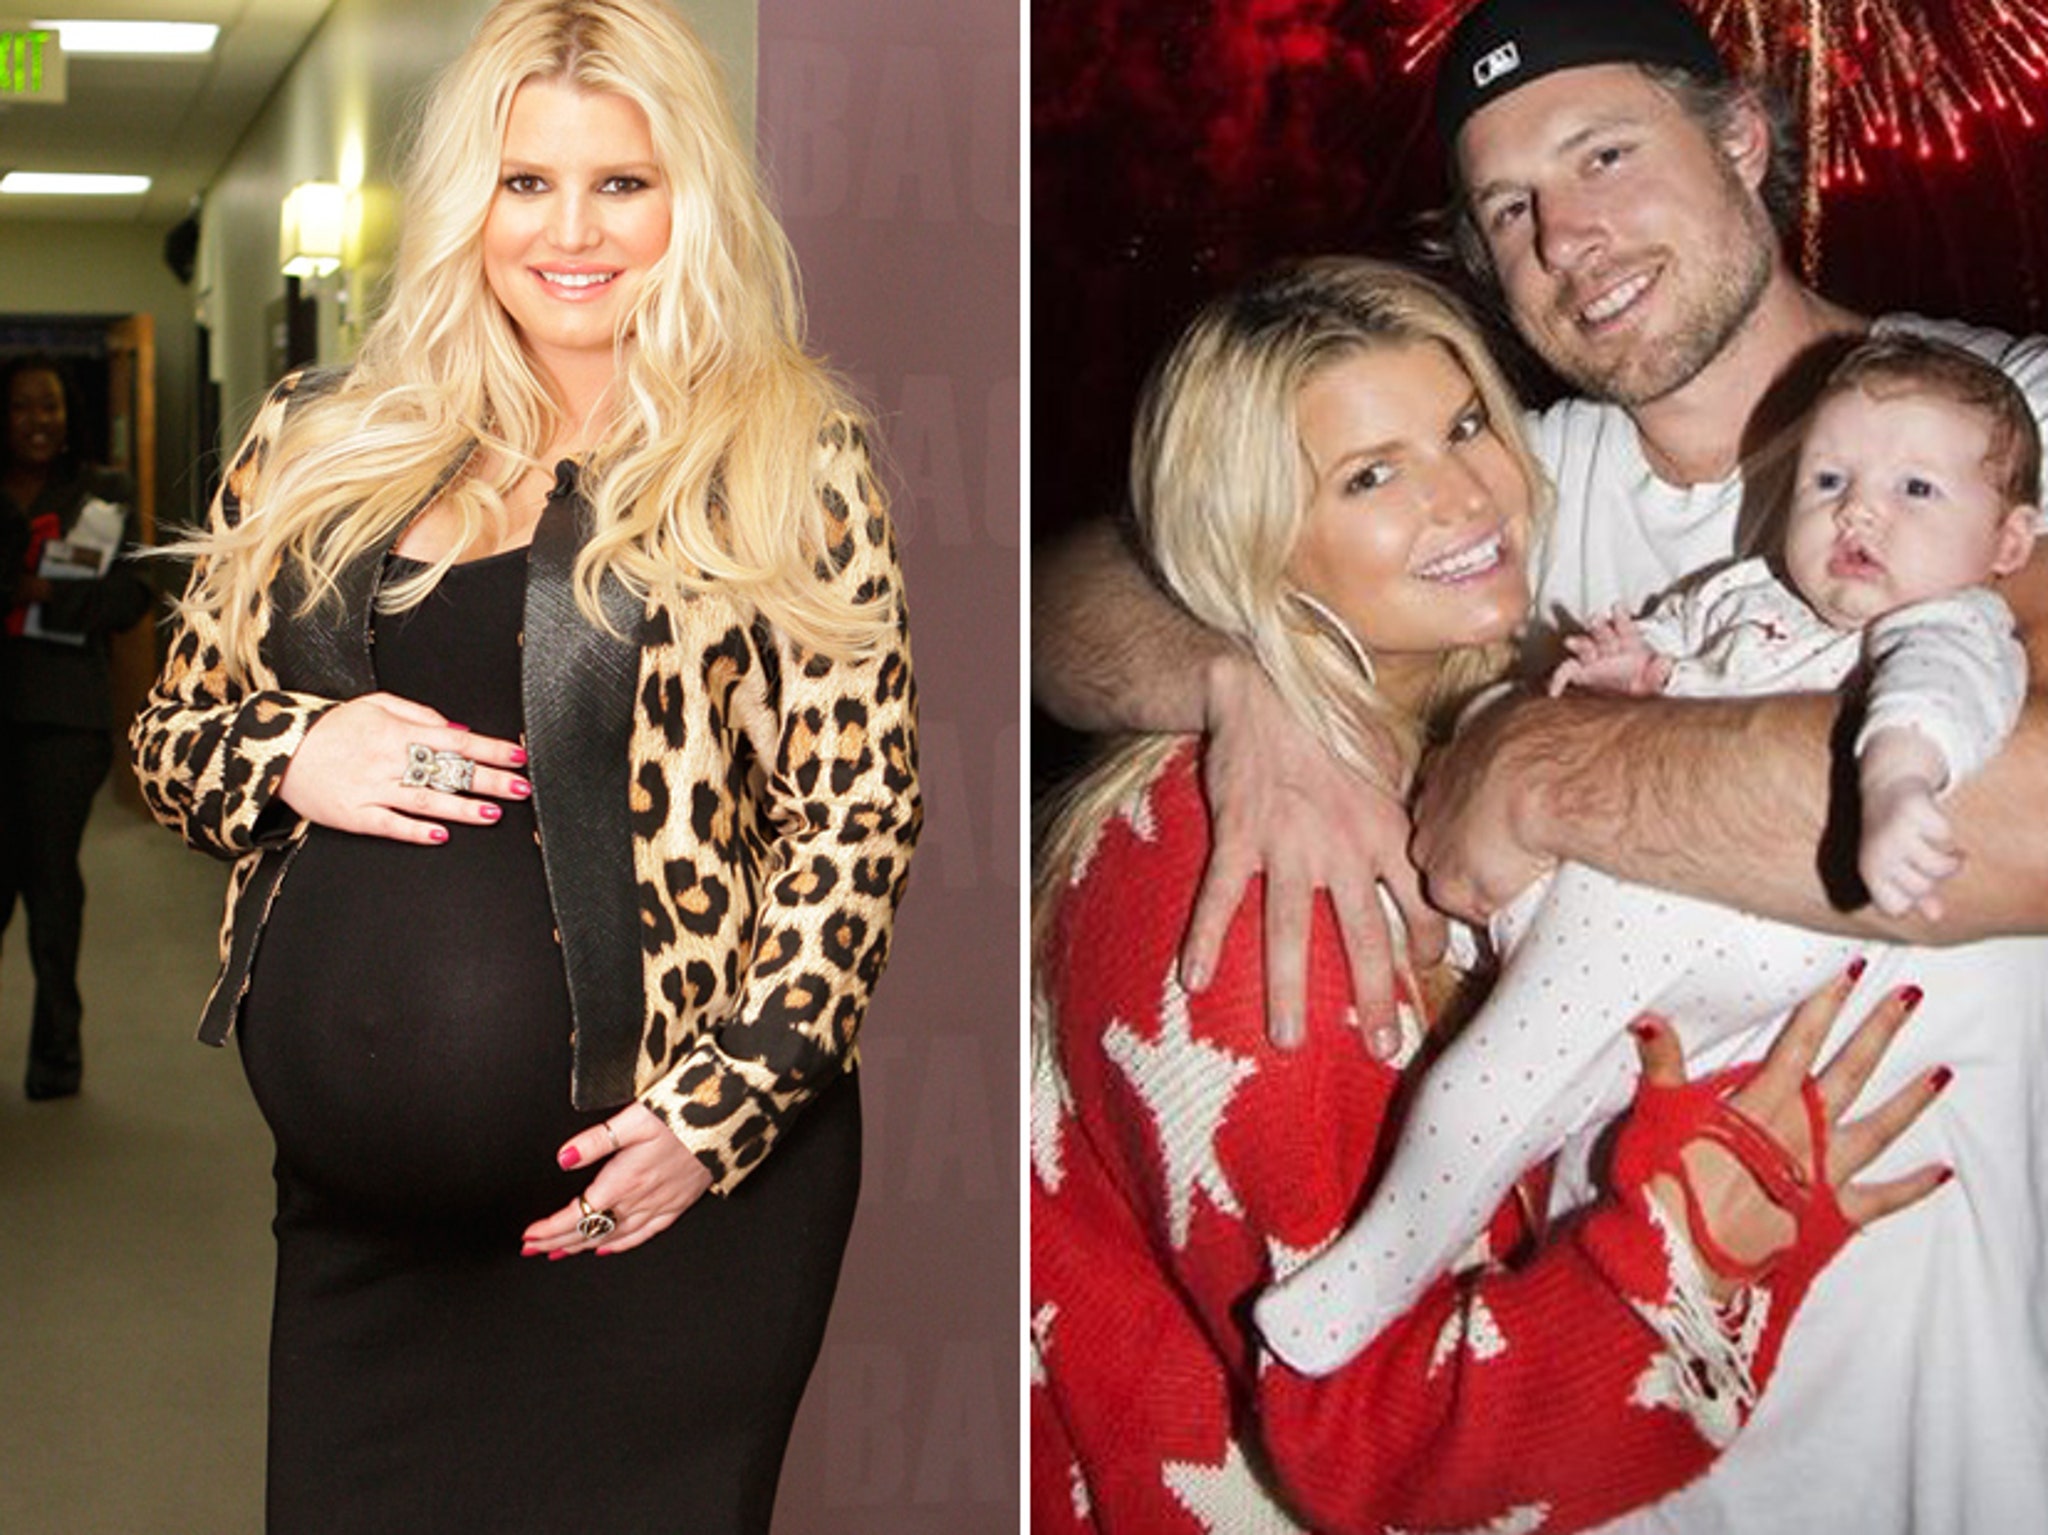 Jessica Simpson Felt 'Empowered' By Criticism To Lose Her Baby Weight:  Photo 3203945, Jessica Simpson Photos